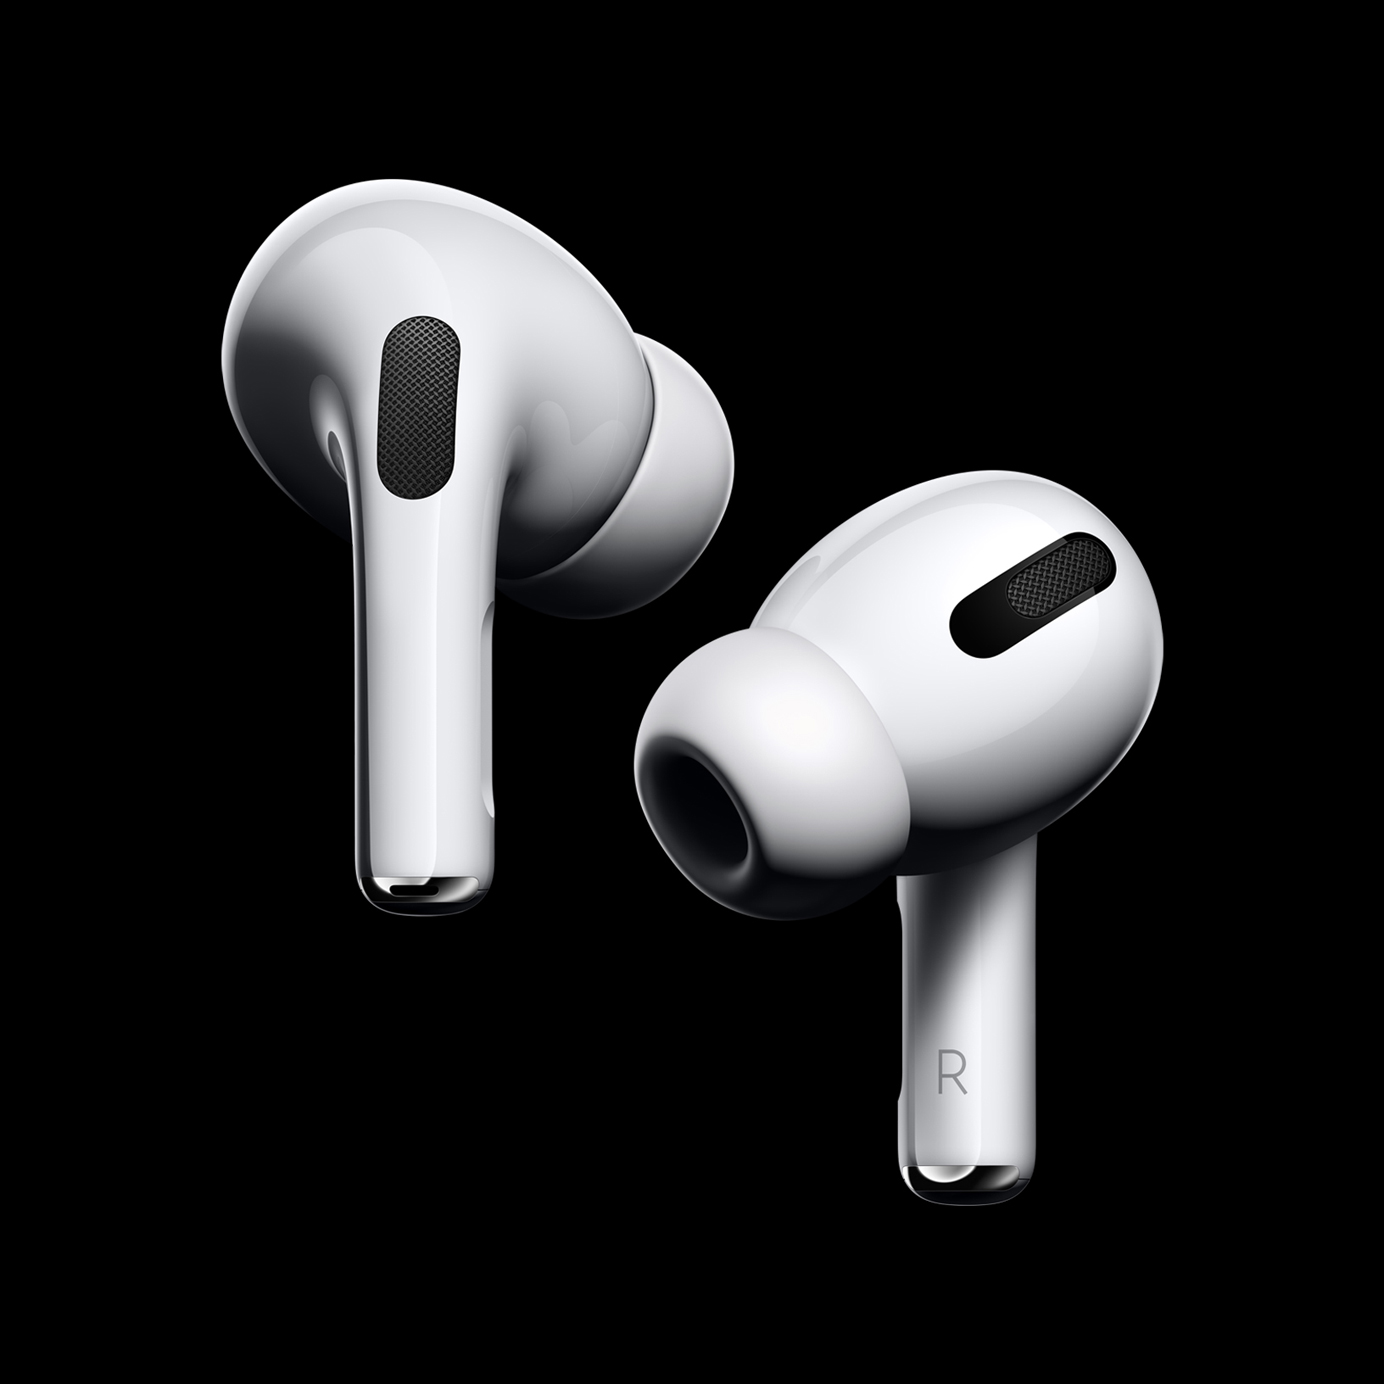 airpods3和airpodspro一样吗 airpods3和airpodspro哪个贵